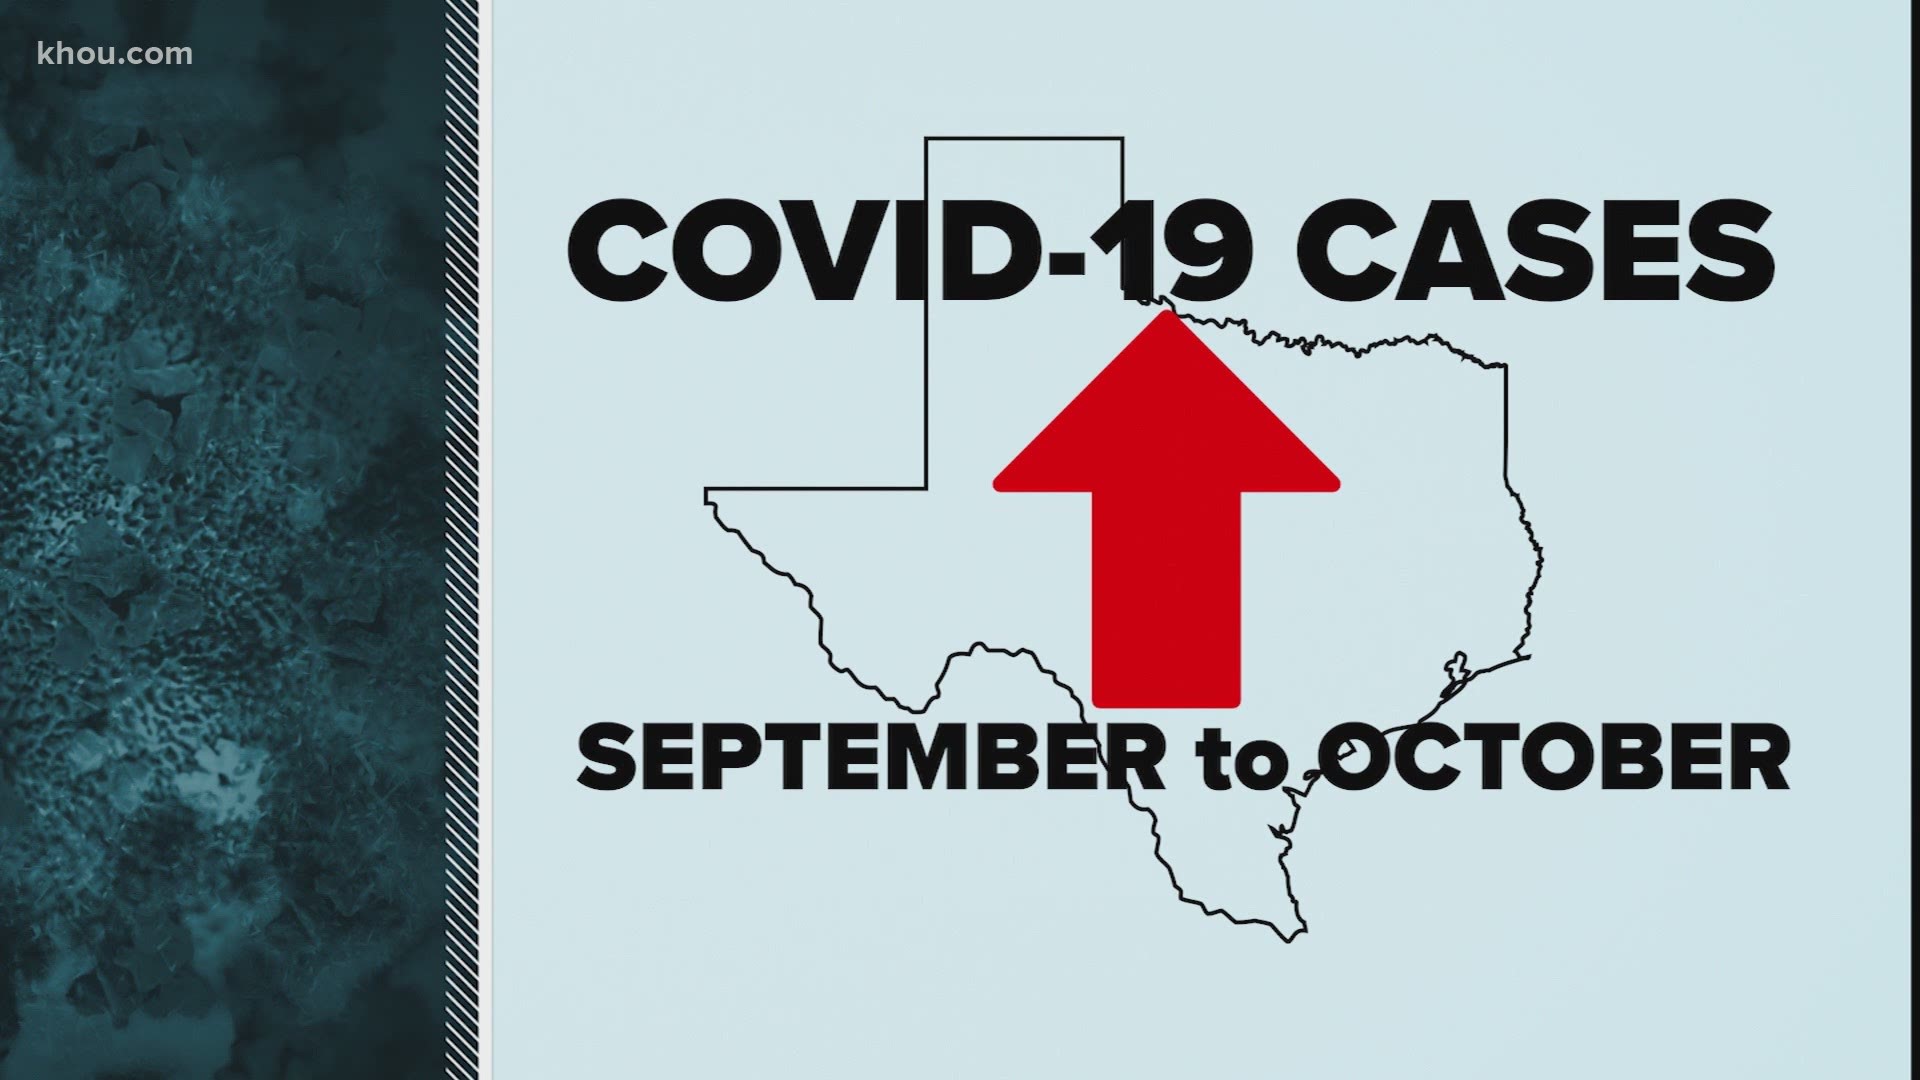 Across Texas, coronavirus cases are spiking rapidly. Wednesday, the state reported 9,048 new cases in a day. The last time DSHS reported that many was Aug. 4.